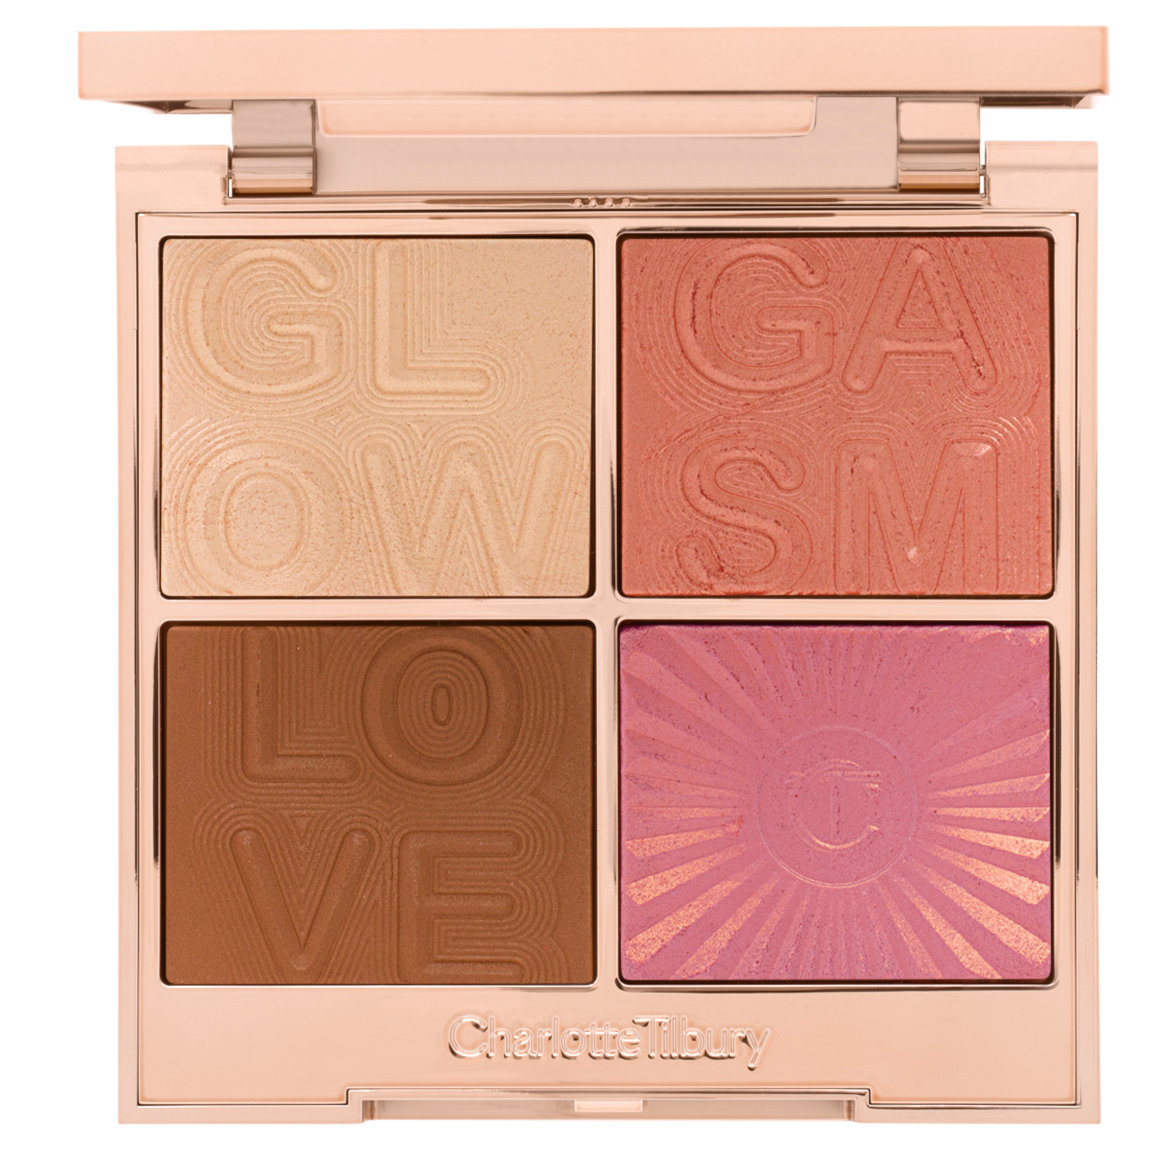 Charlotte TilburyGlowgasm PalettePerfect glowLove love love!one of the best CT productsUghAbsolutely life-changingSo pretty!Best Face Palette- PeriodLove love love MADLY IN LOVE!commom